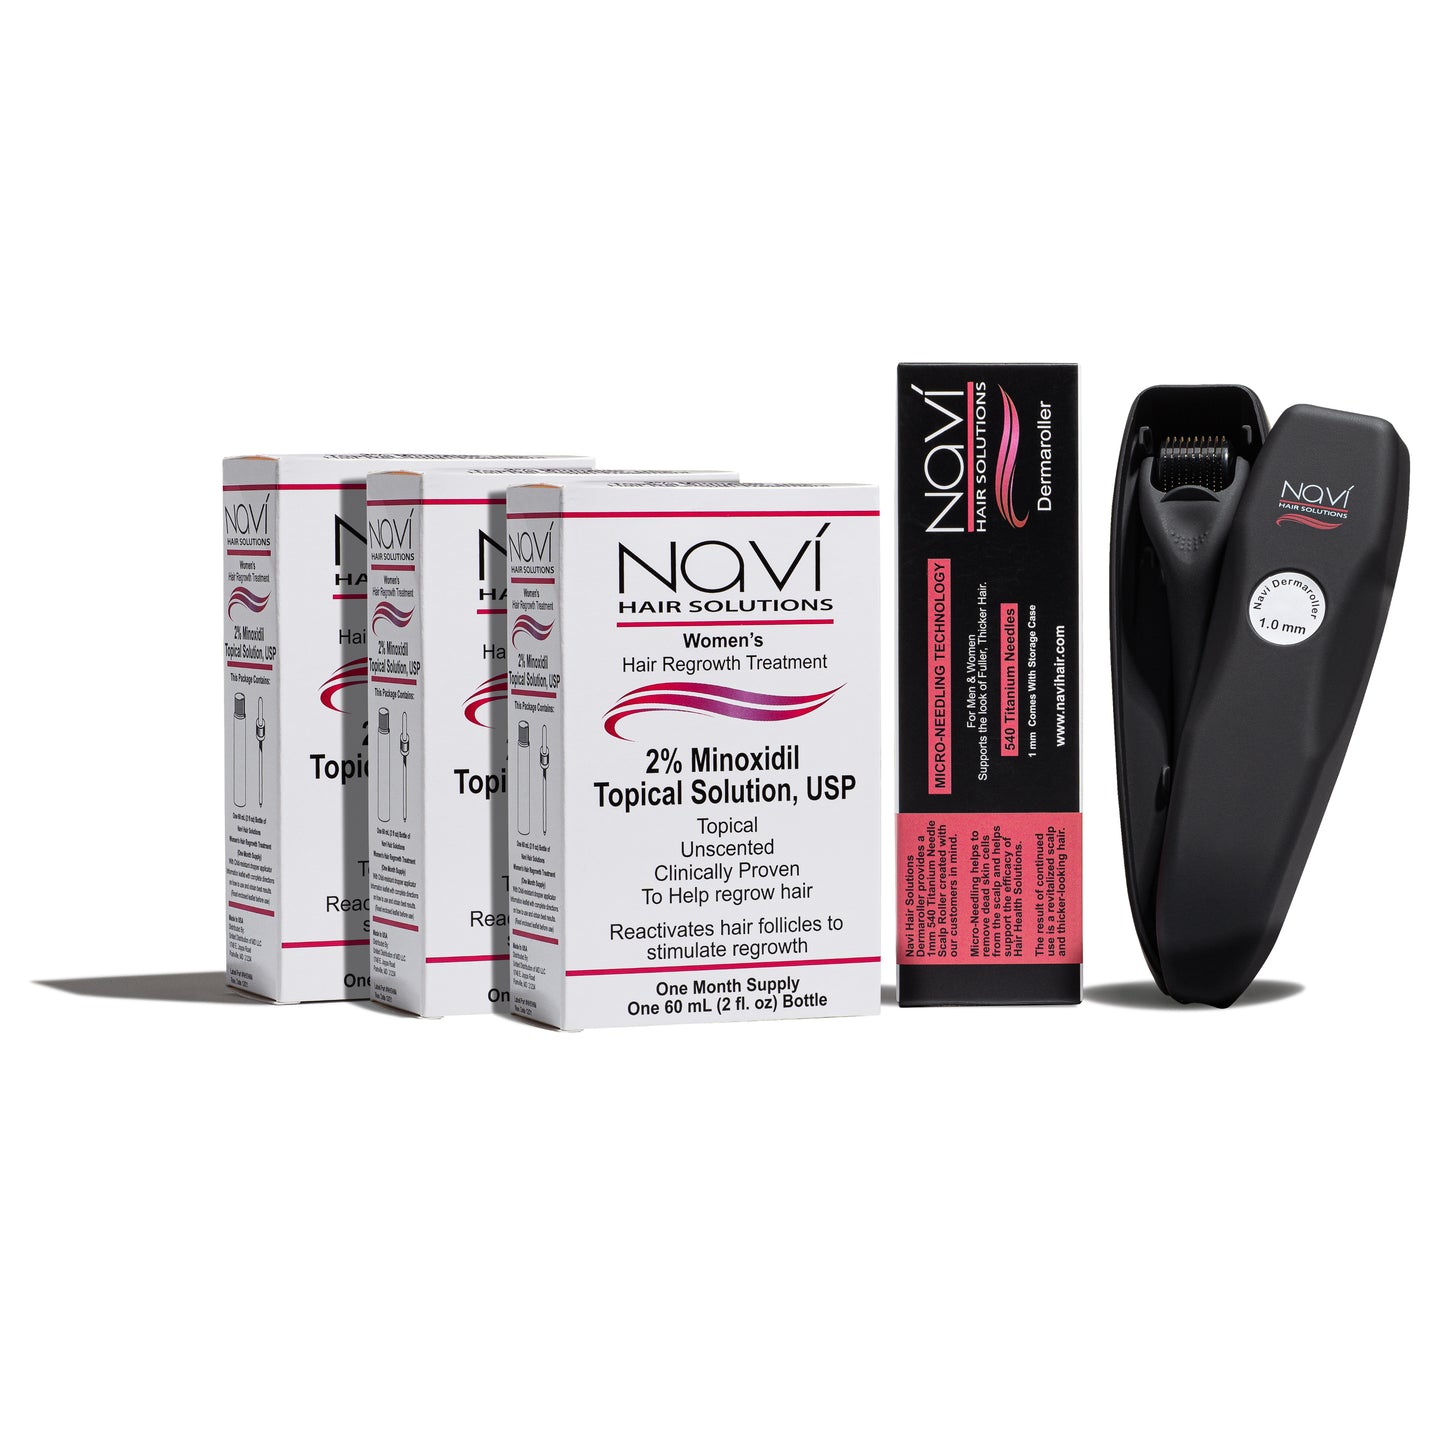 Women's 2% FDA Approved Minoxidil Topical clinically proven to regrow hair and scalp derma roller